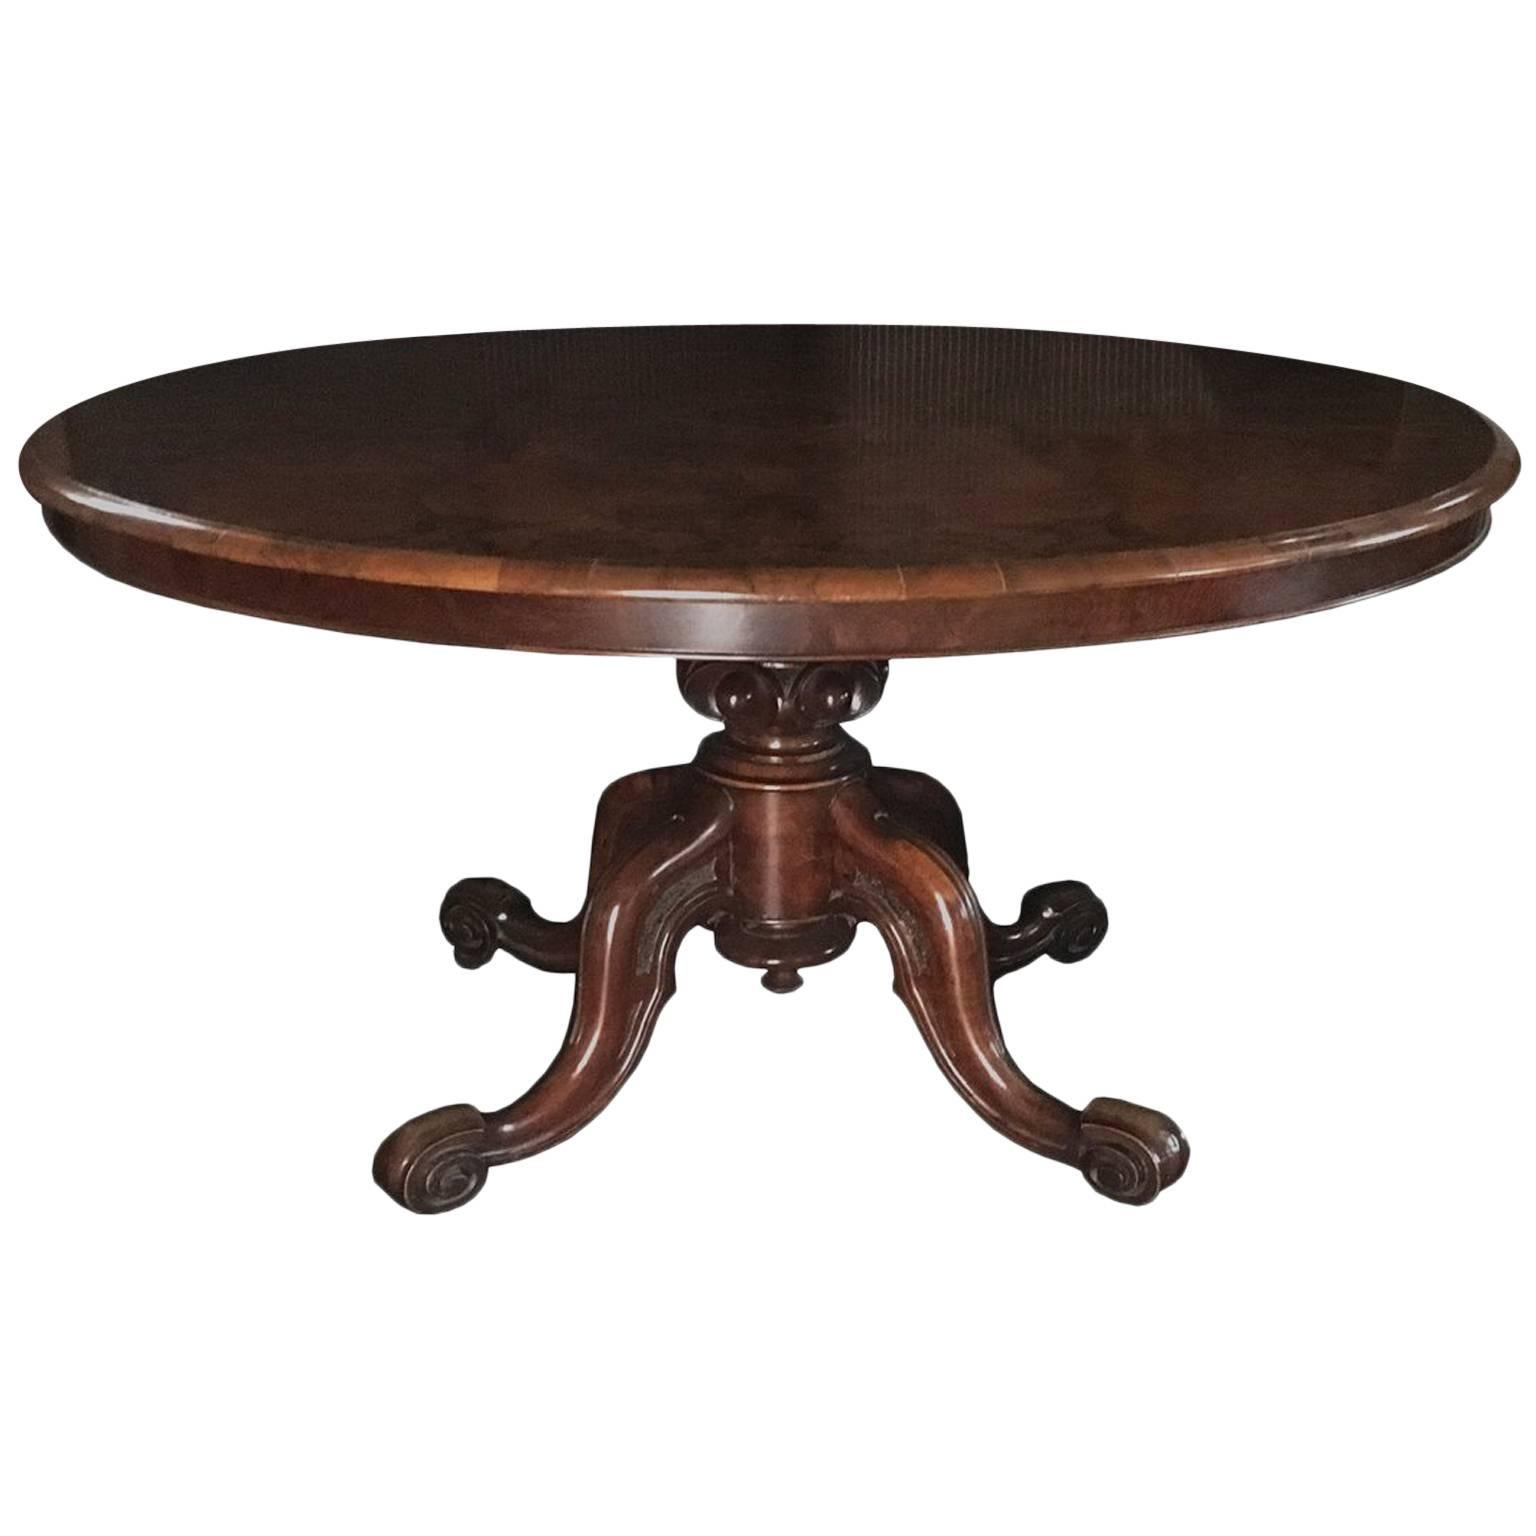 London Mid-19th Century Oval Walnut Tip Top Table by T.H. Filmer & Sons For Sale